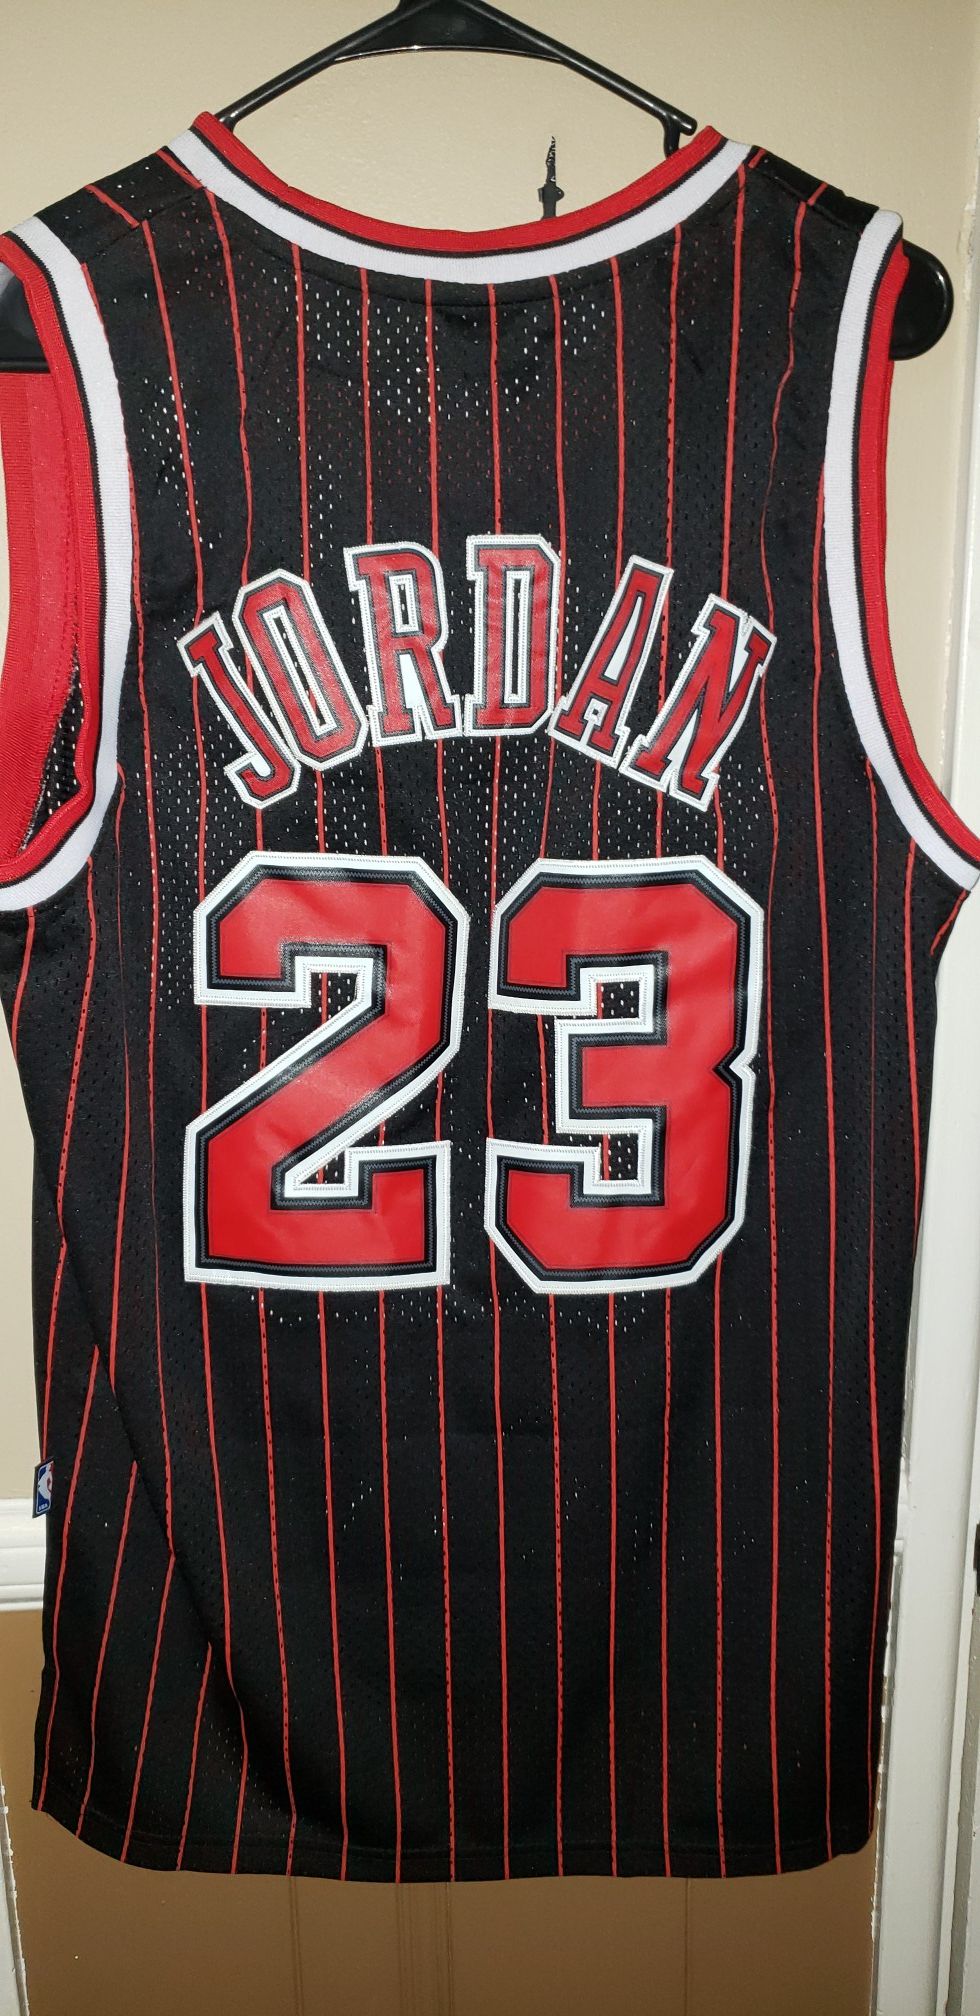 New!!! Men's Small Michael Jordan Chicago Bulls Jersey New with Tags Stiched Nike $50. Ships +$3. Pick up in West Covina